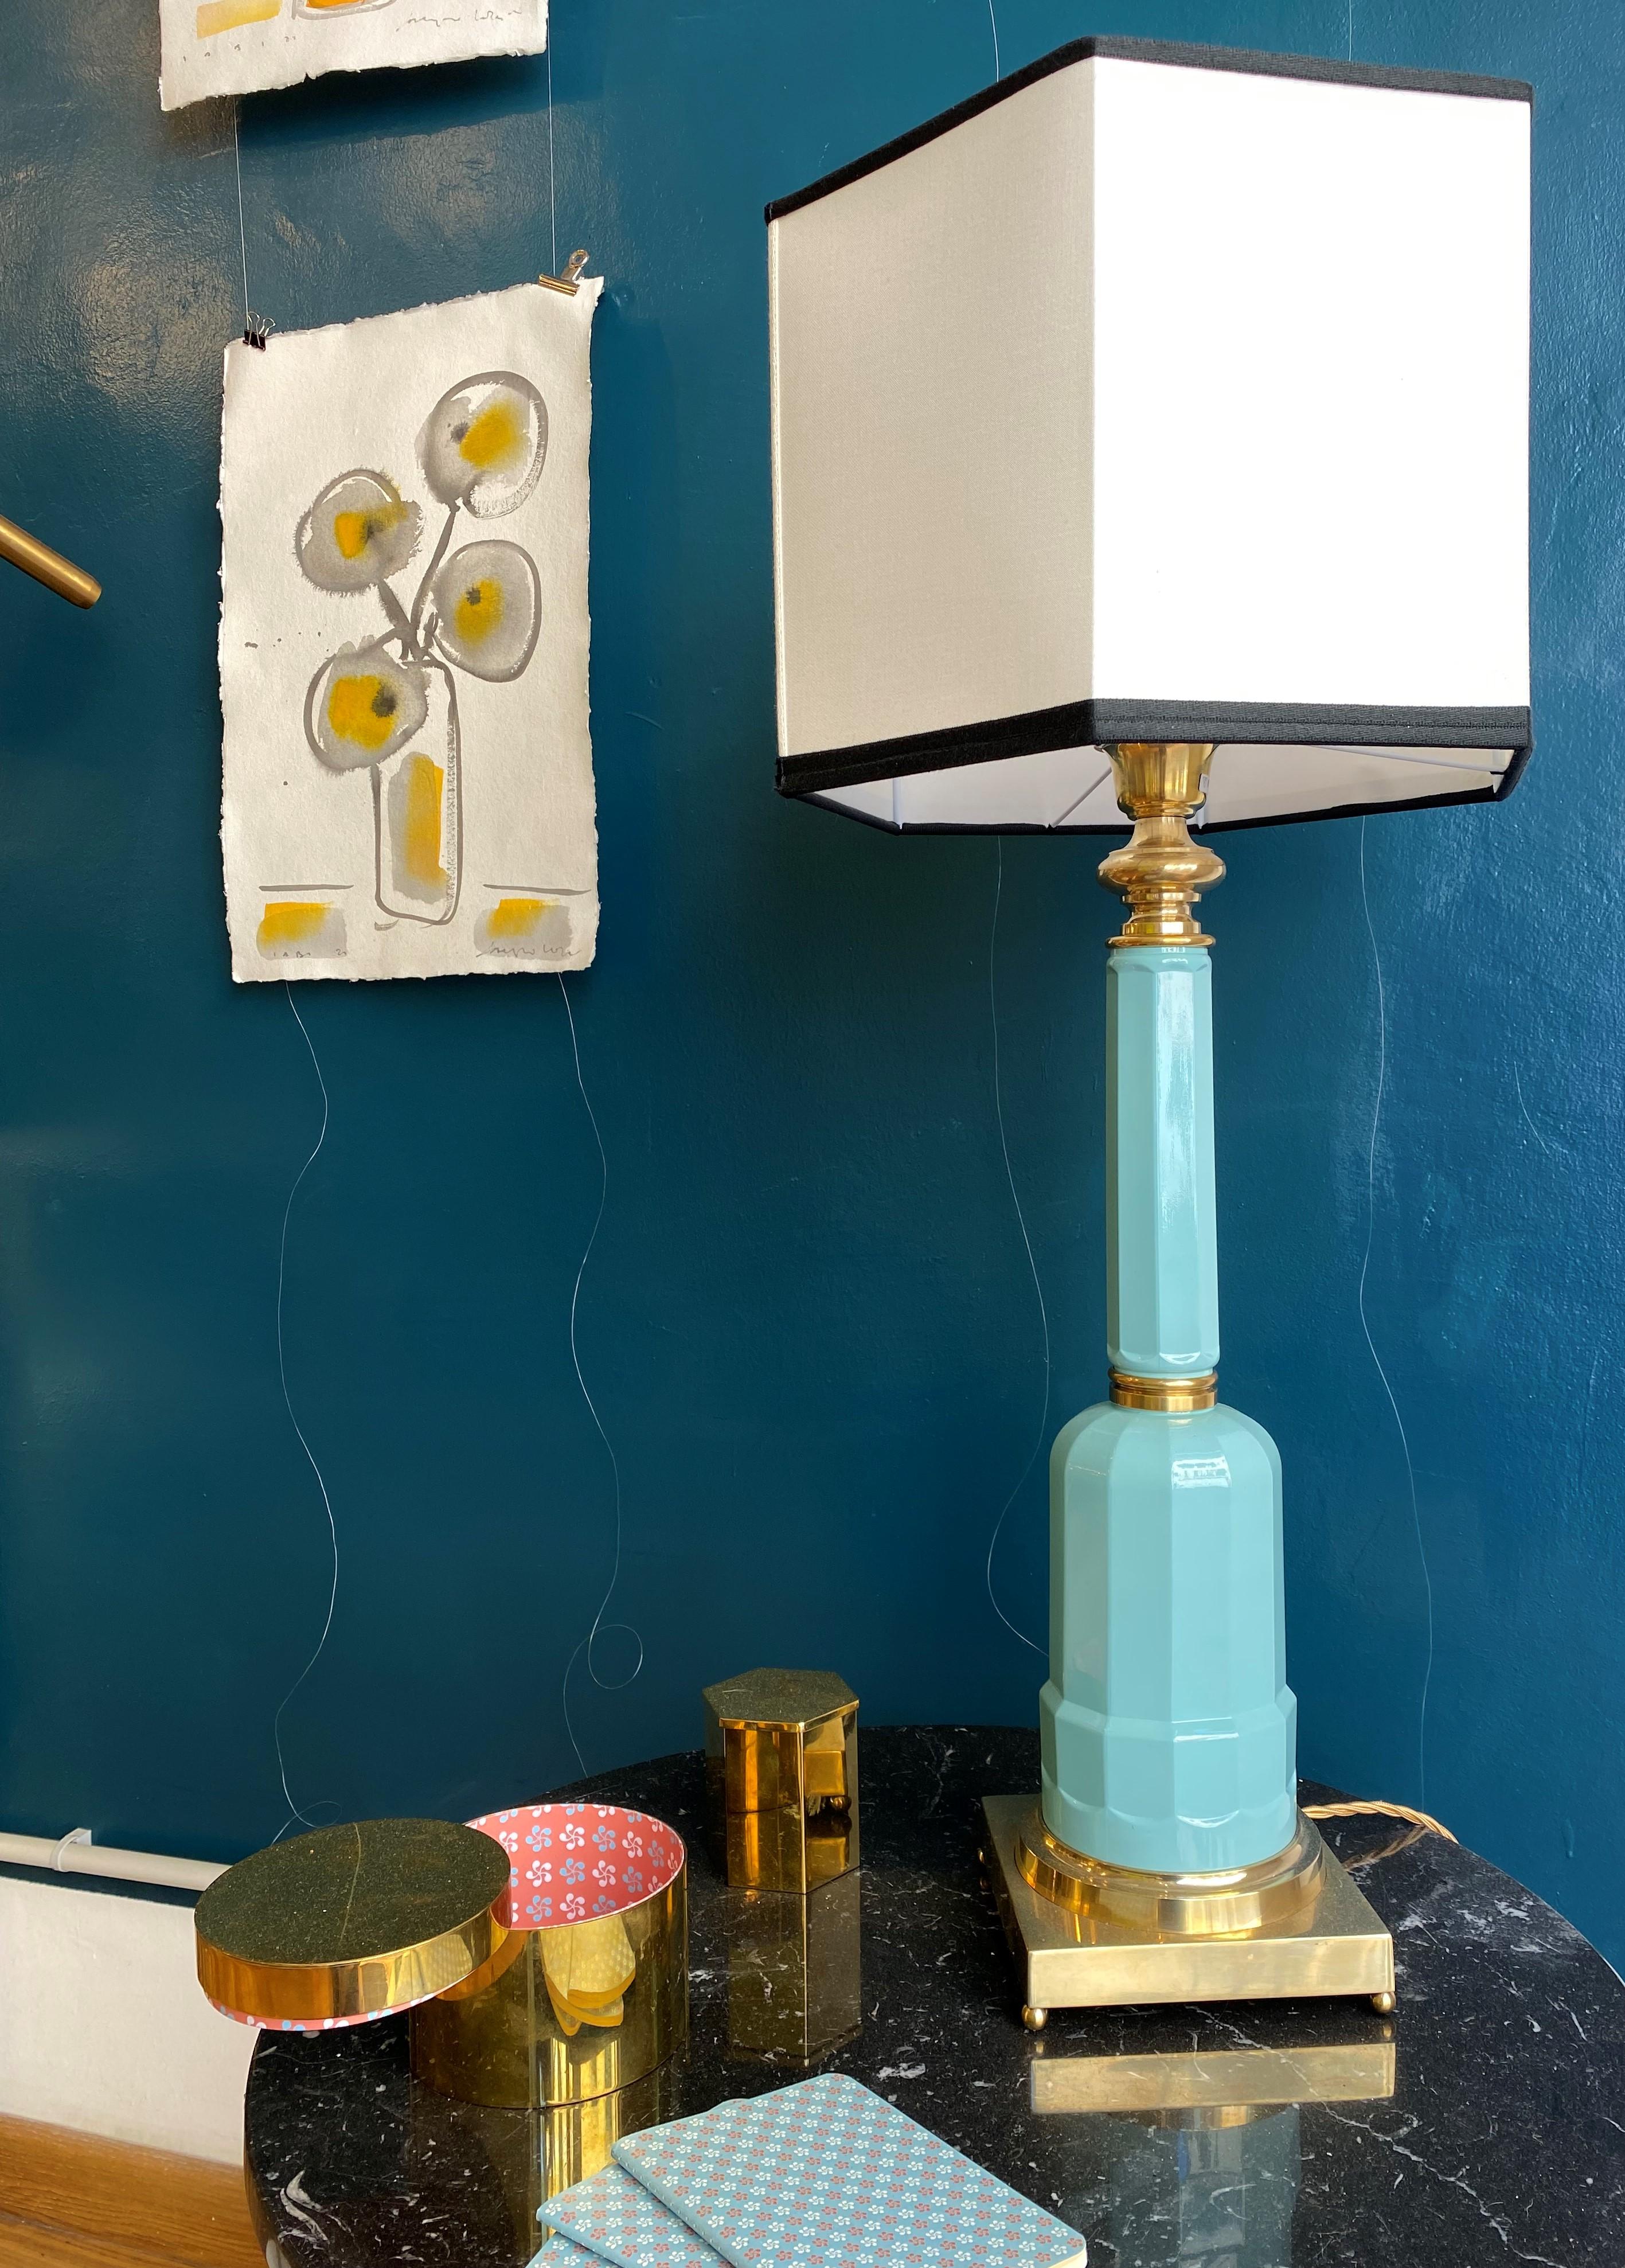 The Jacaranda table lamp is made of blown glass with the base and details in brass, natural finish, and fabric lampshade. The glass structure is obtained with the artisan technique of glass blowing inside a mold, usually of wood or carved metal, in